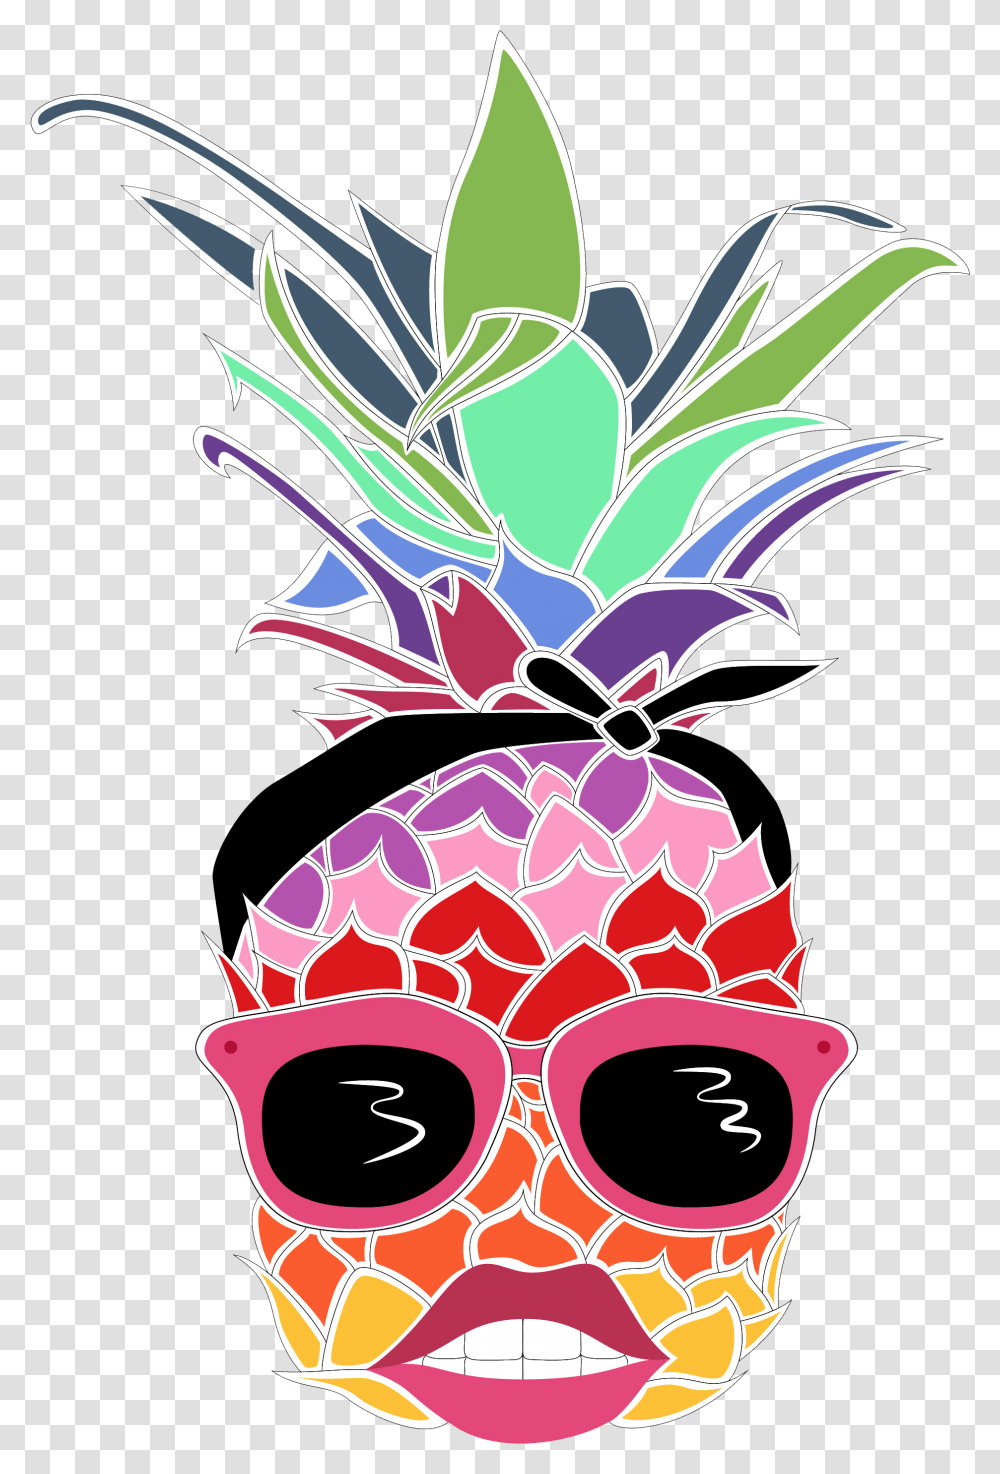 Pin Up Pineapple, Plant, Sunglasses, Accessories, Fruit Transparent Png